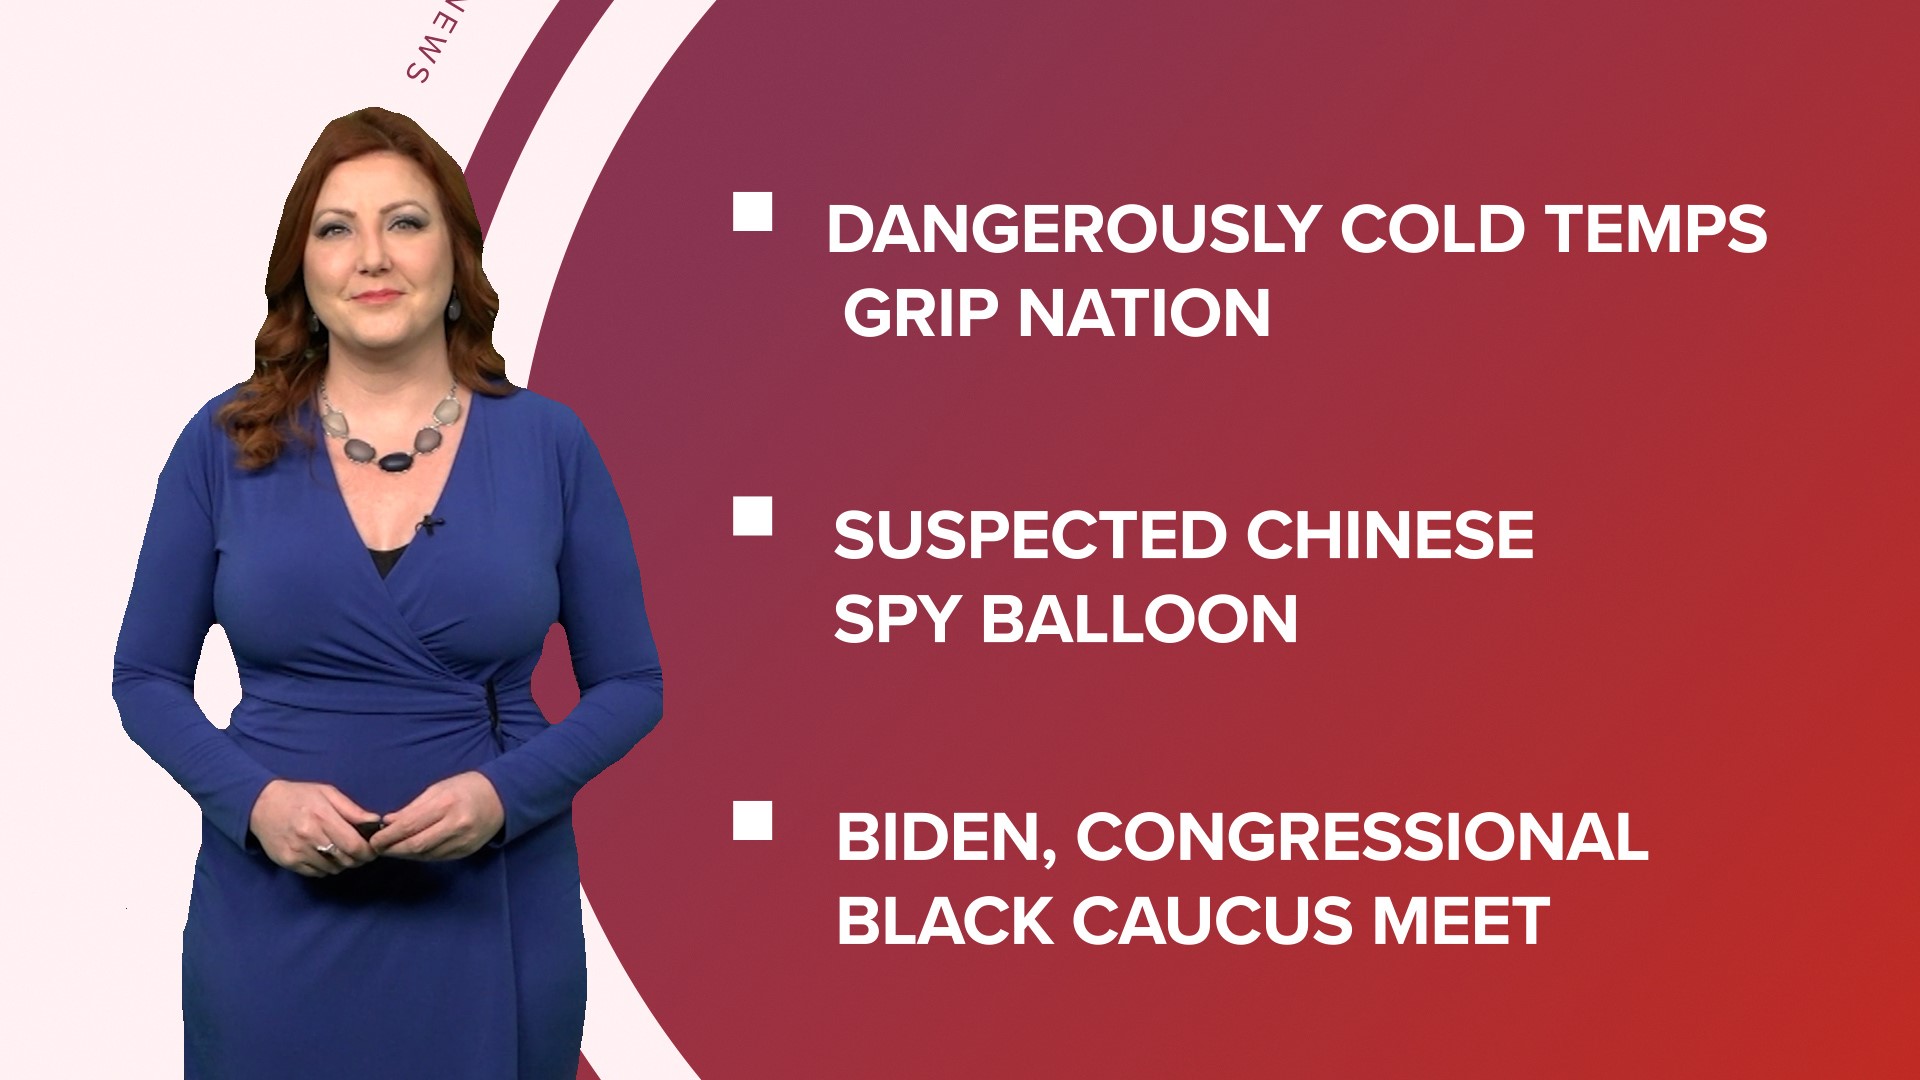 A look at what is happening in the news from the dangerously cold temps to national police reform and a suspected Chinese spy balloon.